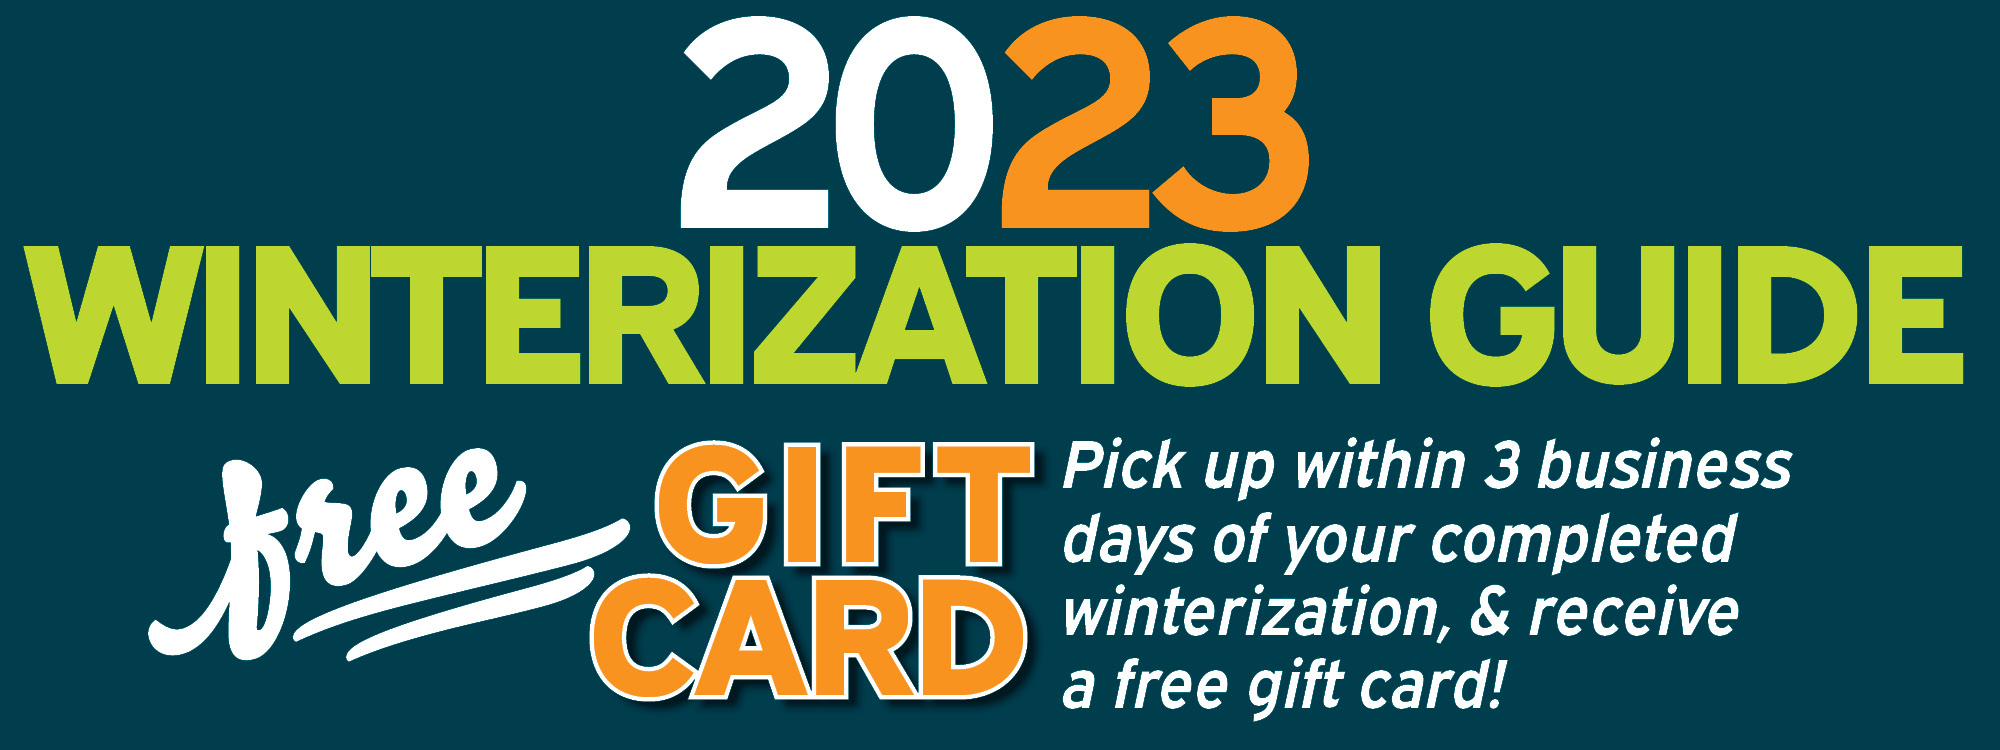 Free Gift Card if pickup within three business days of your completed winterization